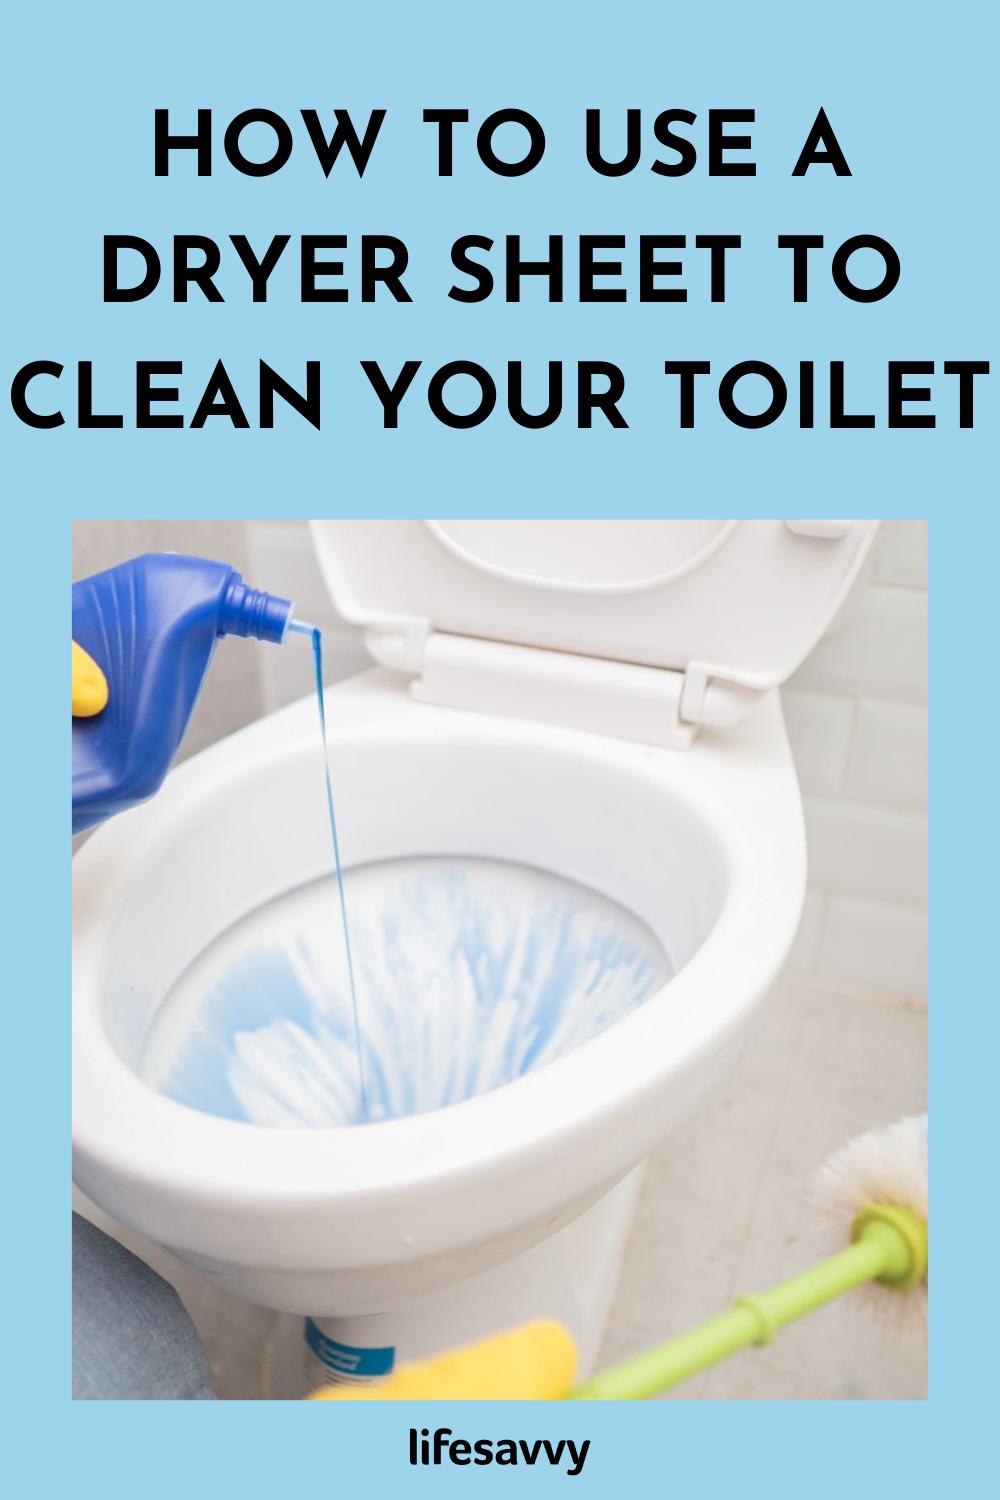 How to Use a Dryer Sheet to Clean Your Toilet